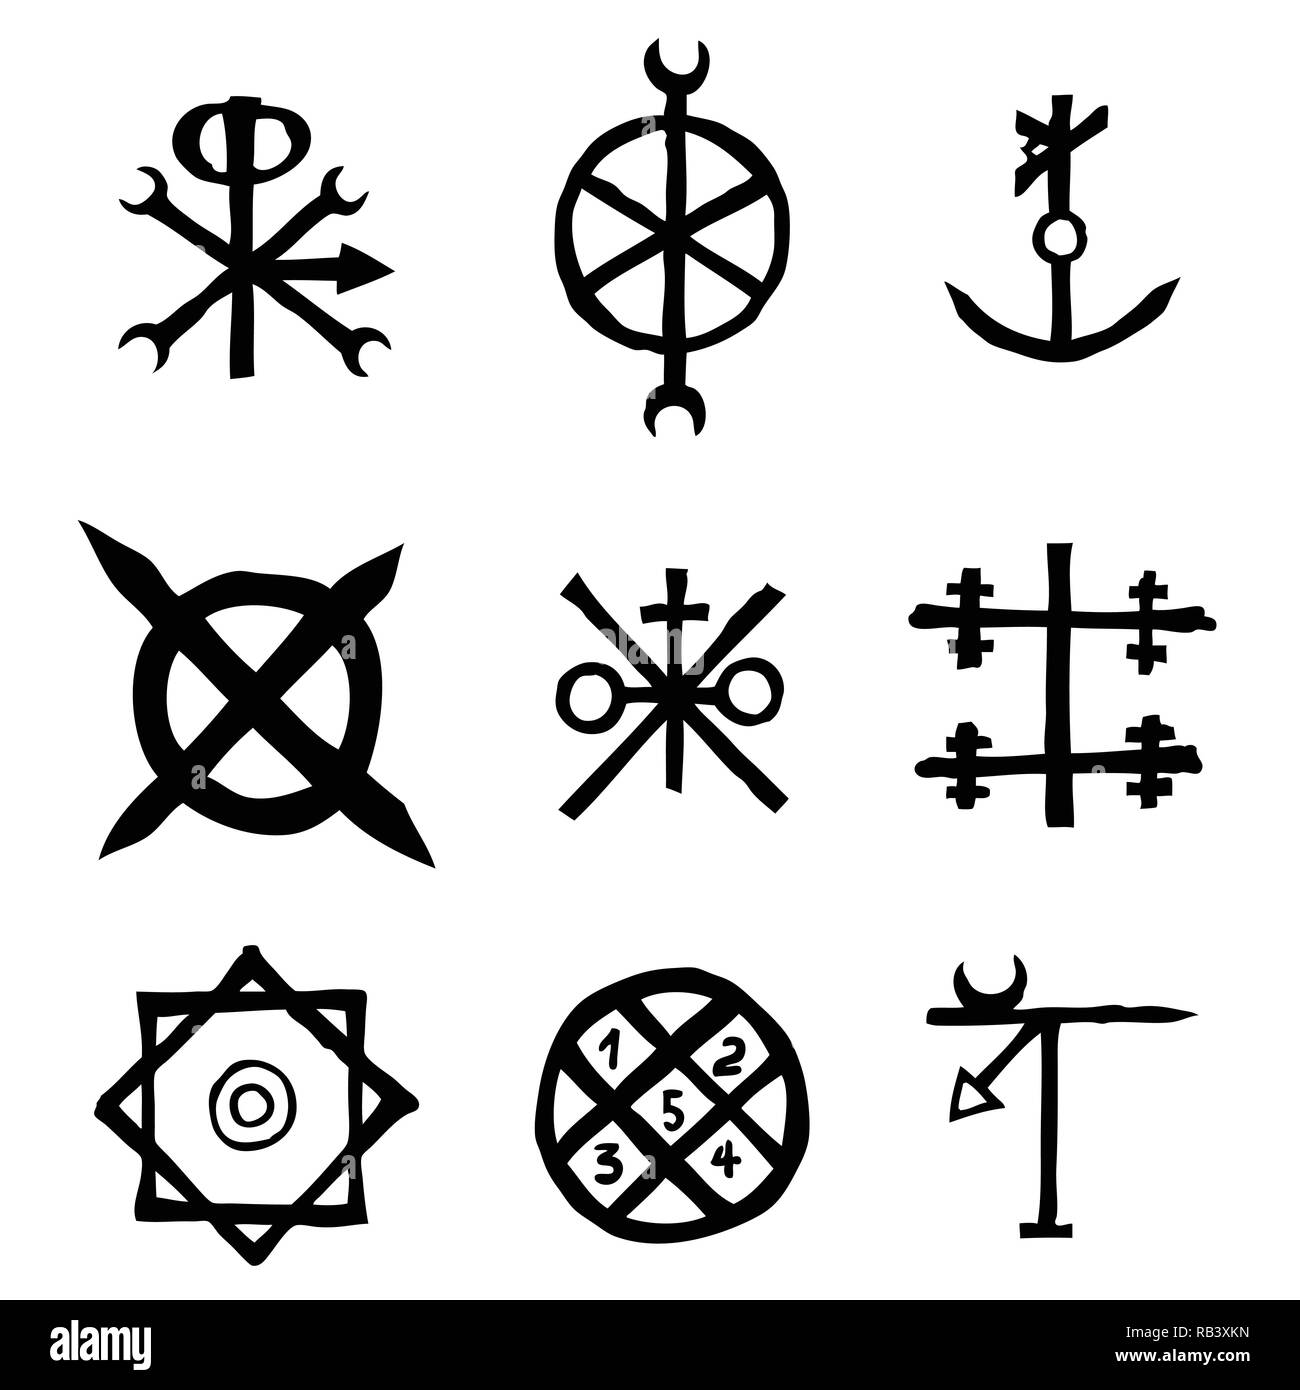 Viking Symbol Tattoo (and their Meaning)